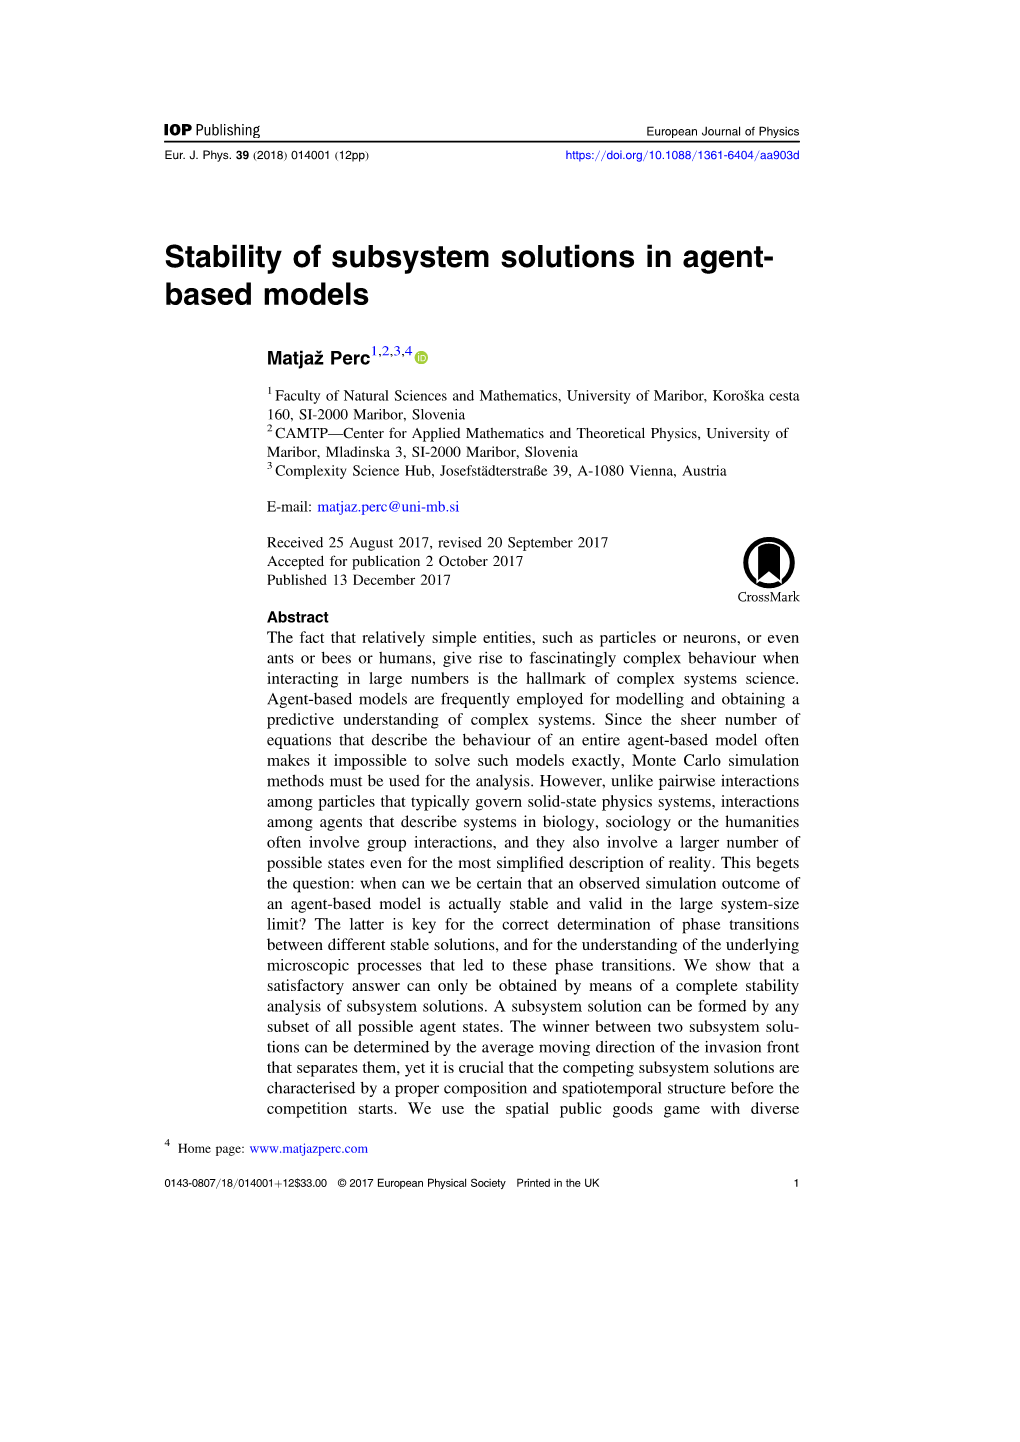 Stability of Subsystem Solutions in Agent- Based Models